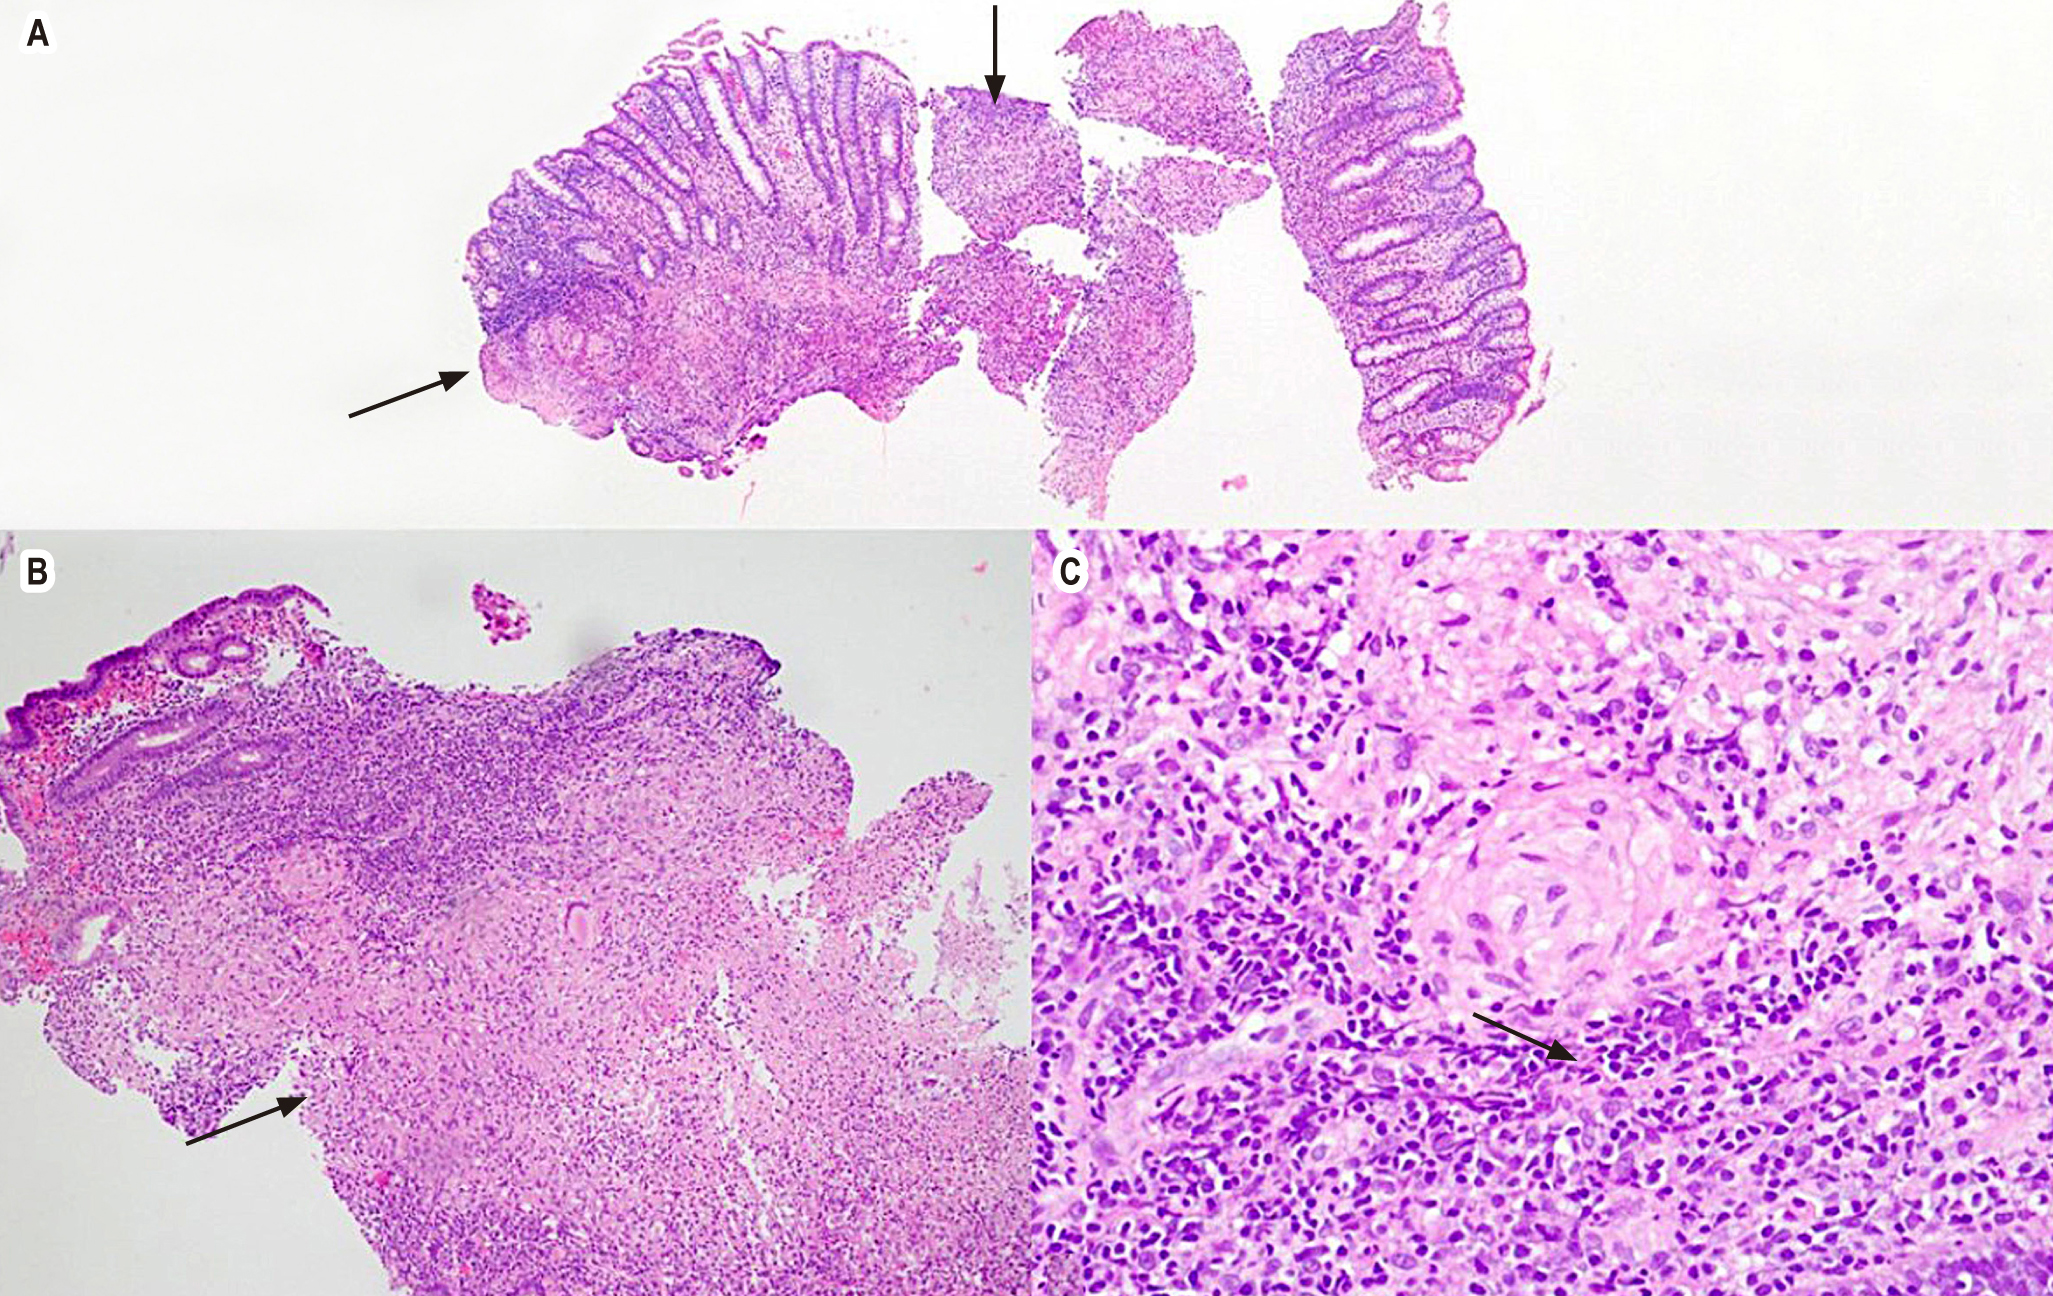 Figure 2. Granulomatous colitis with hematoxylin and eosin. A. 4x, colonic mucosa, arrows point to granulomas. B. 10x, the lamina propria shows the formation of well-defined granulomas and some neutrophil abscesses. C. 40x, epithelioid granuloma. Source: Patient’s medical record.